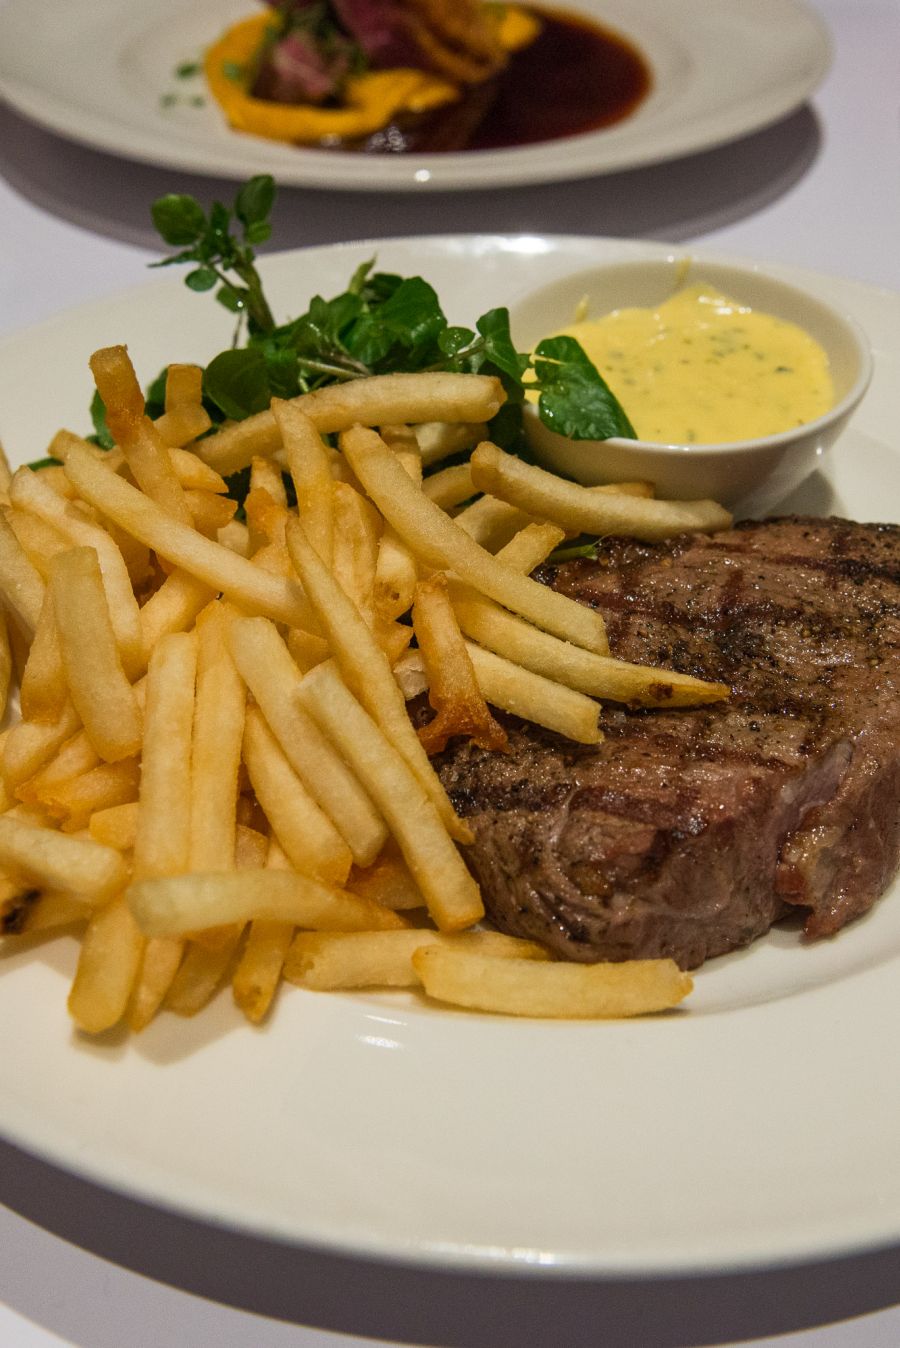 Chargrilled Butterfield sirloin steak (270g, dry aged for 28 days), bernaise sauce, frites, watercress salad (AU$46)